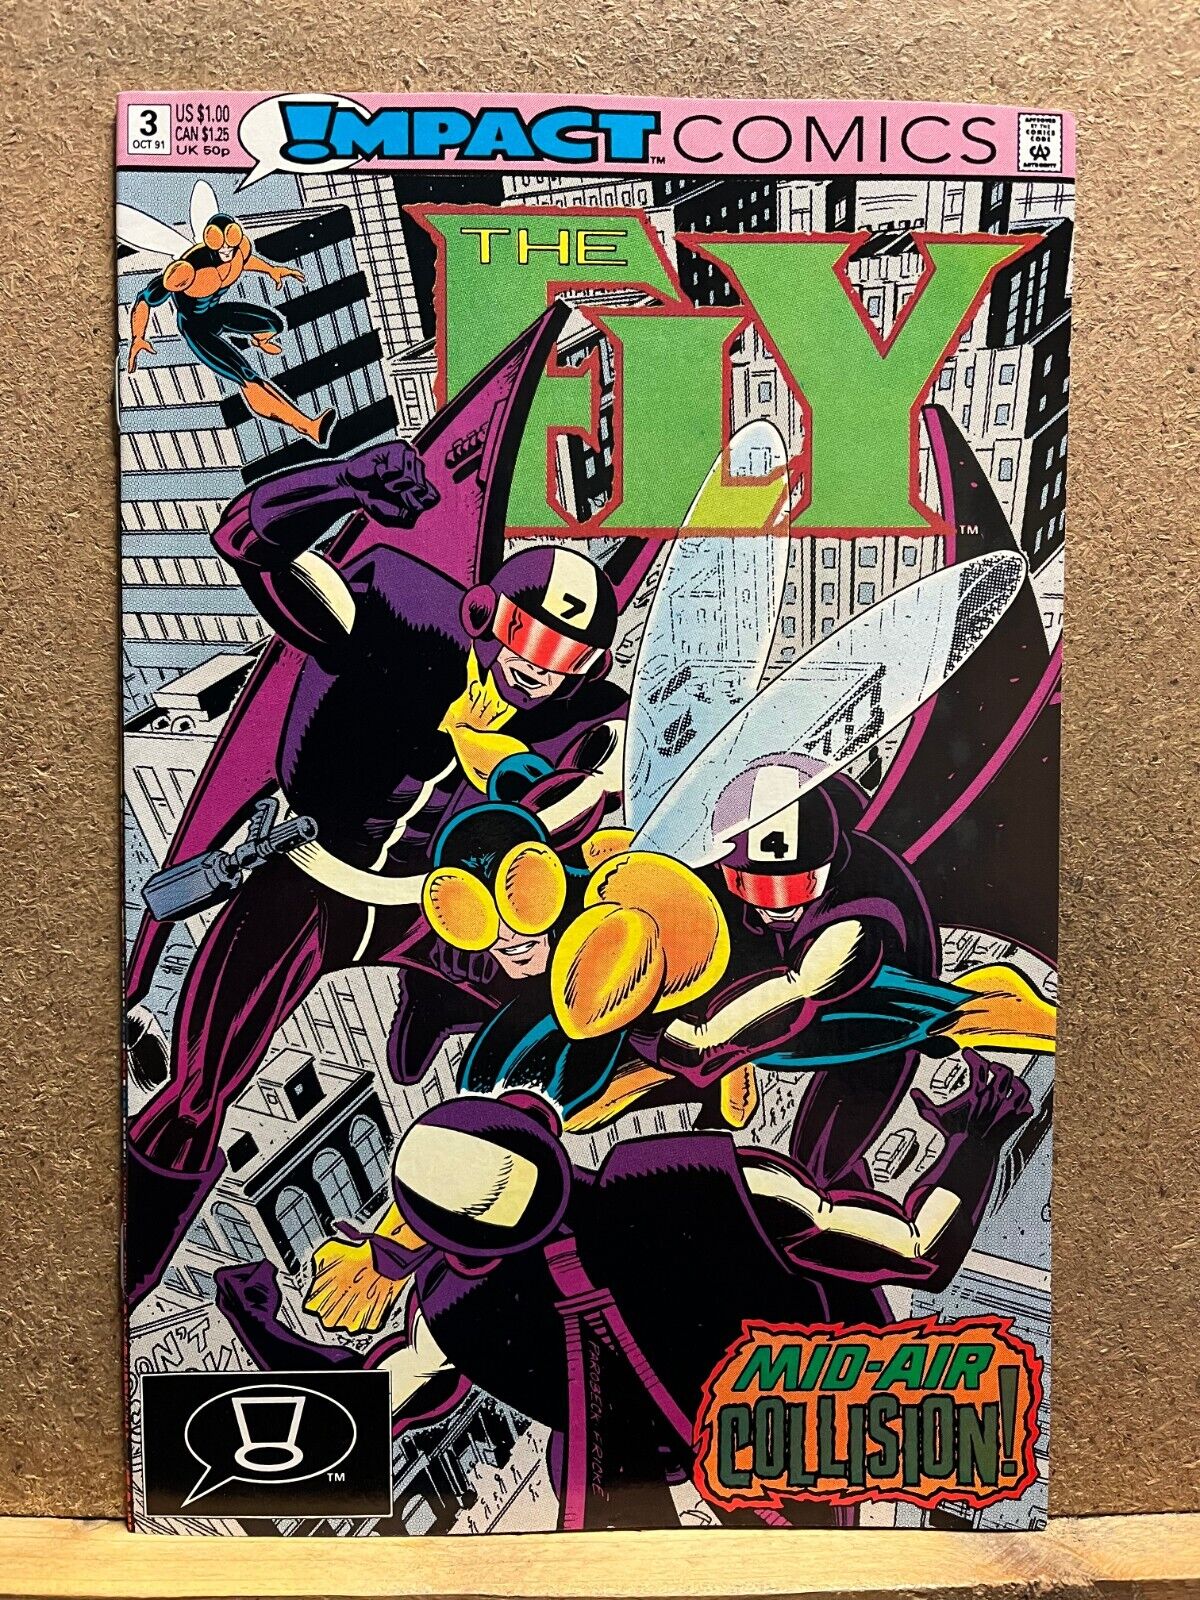 THE FLY - # 3 - OCTOBER 1991 - VF+